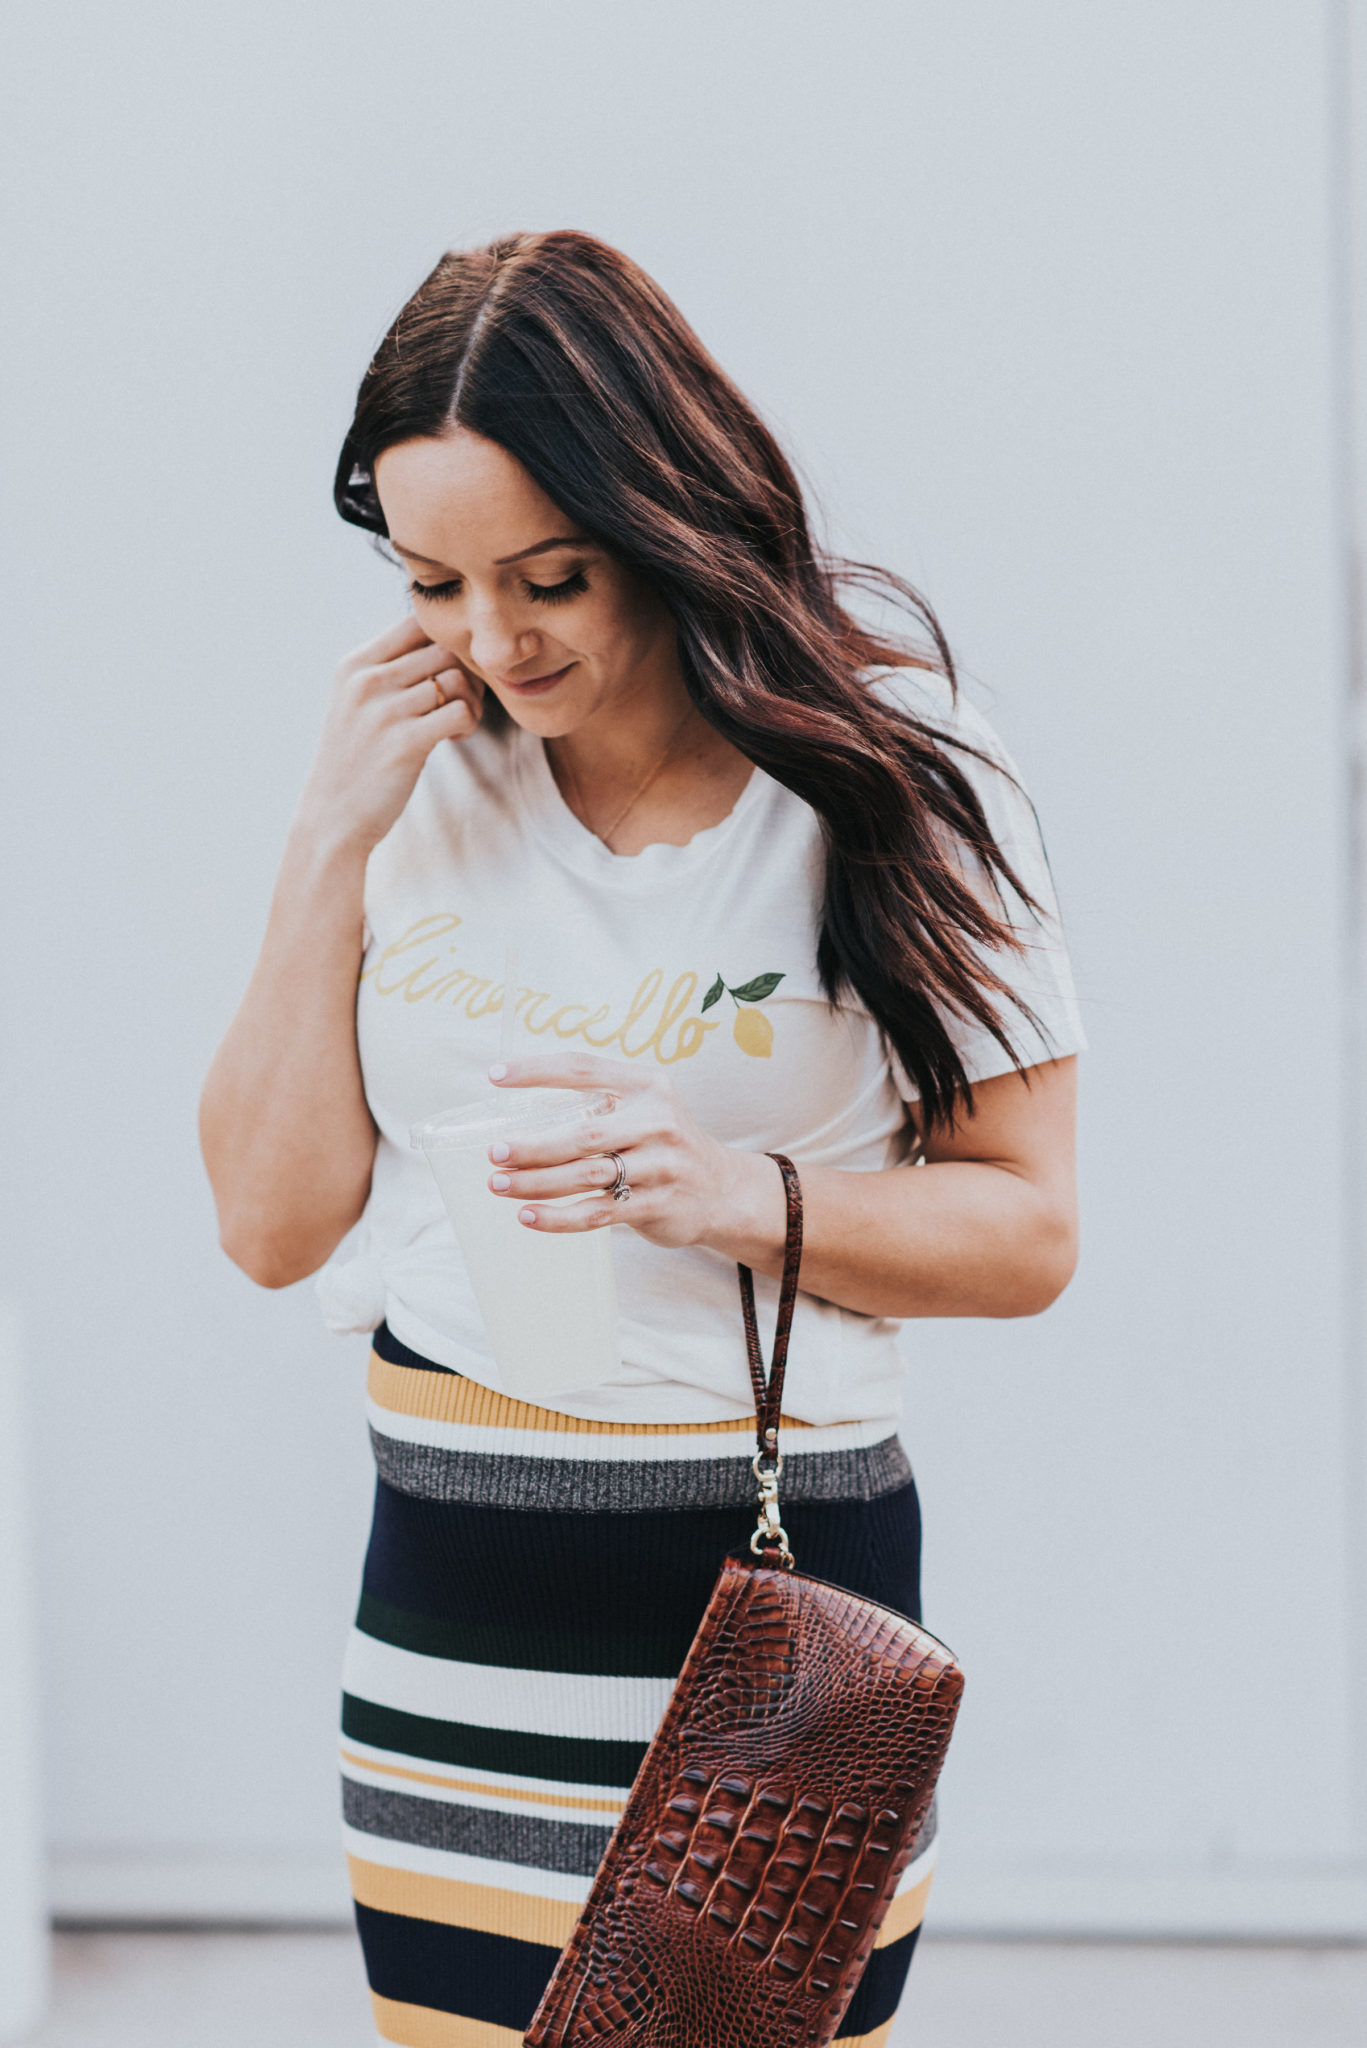 Spring Maternity Fashion with Non Maternity Pieces by popular Las Vegas fashion blogger and expecting mom Outfits & Outings